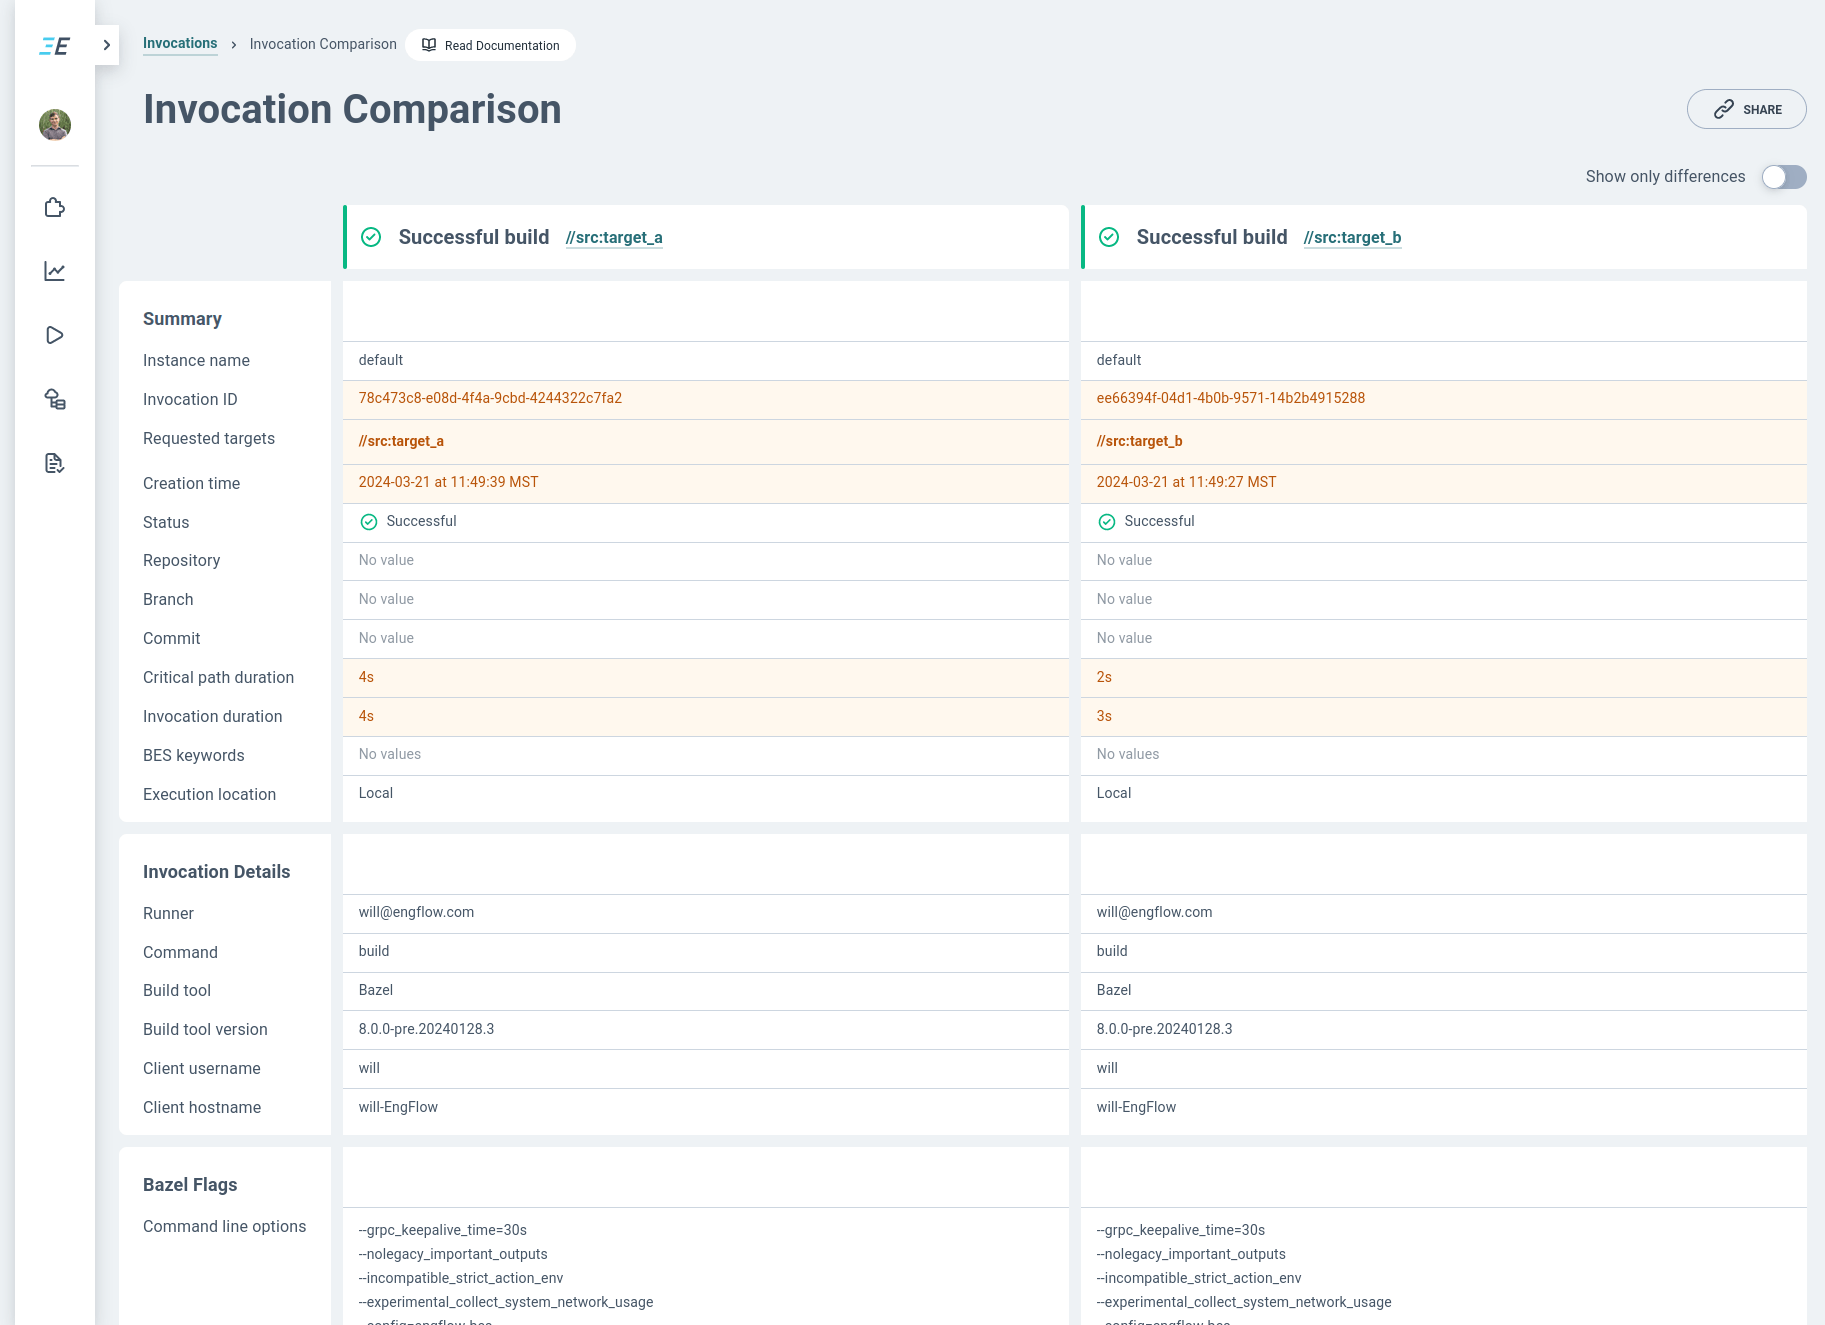 screenshot of the invocation comparison page